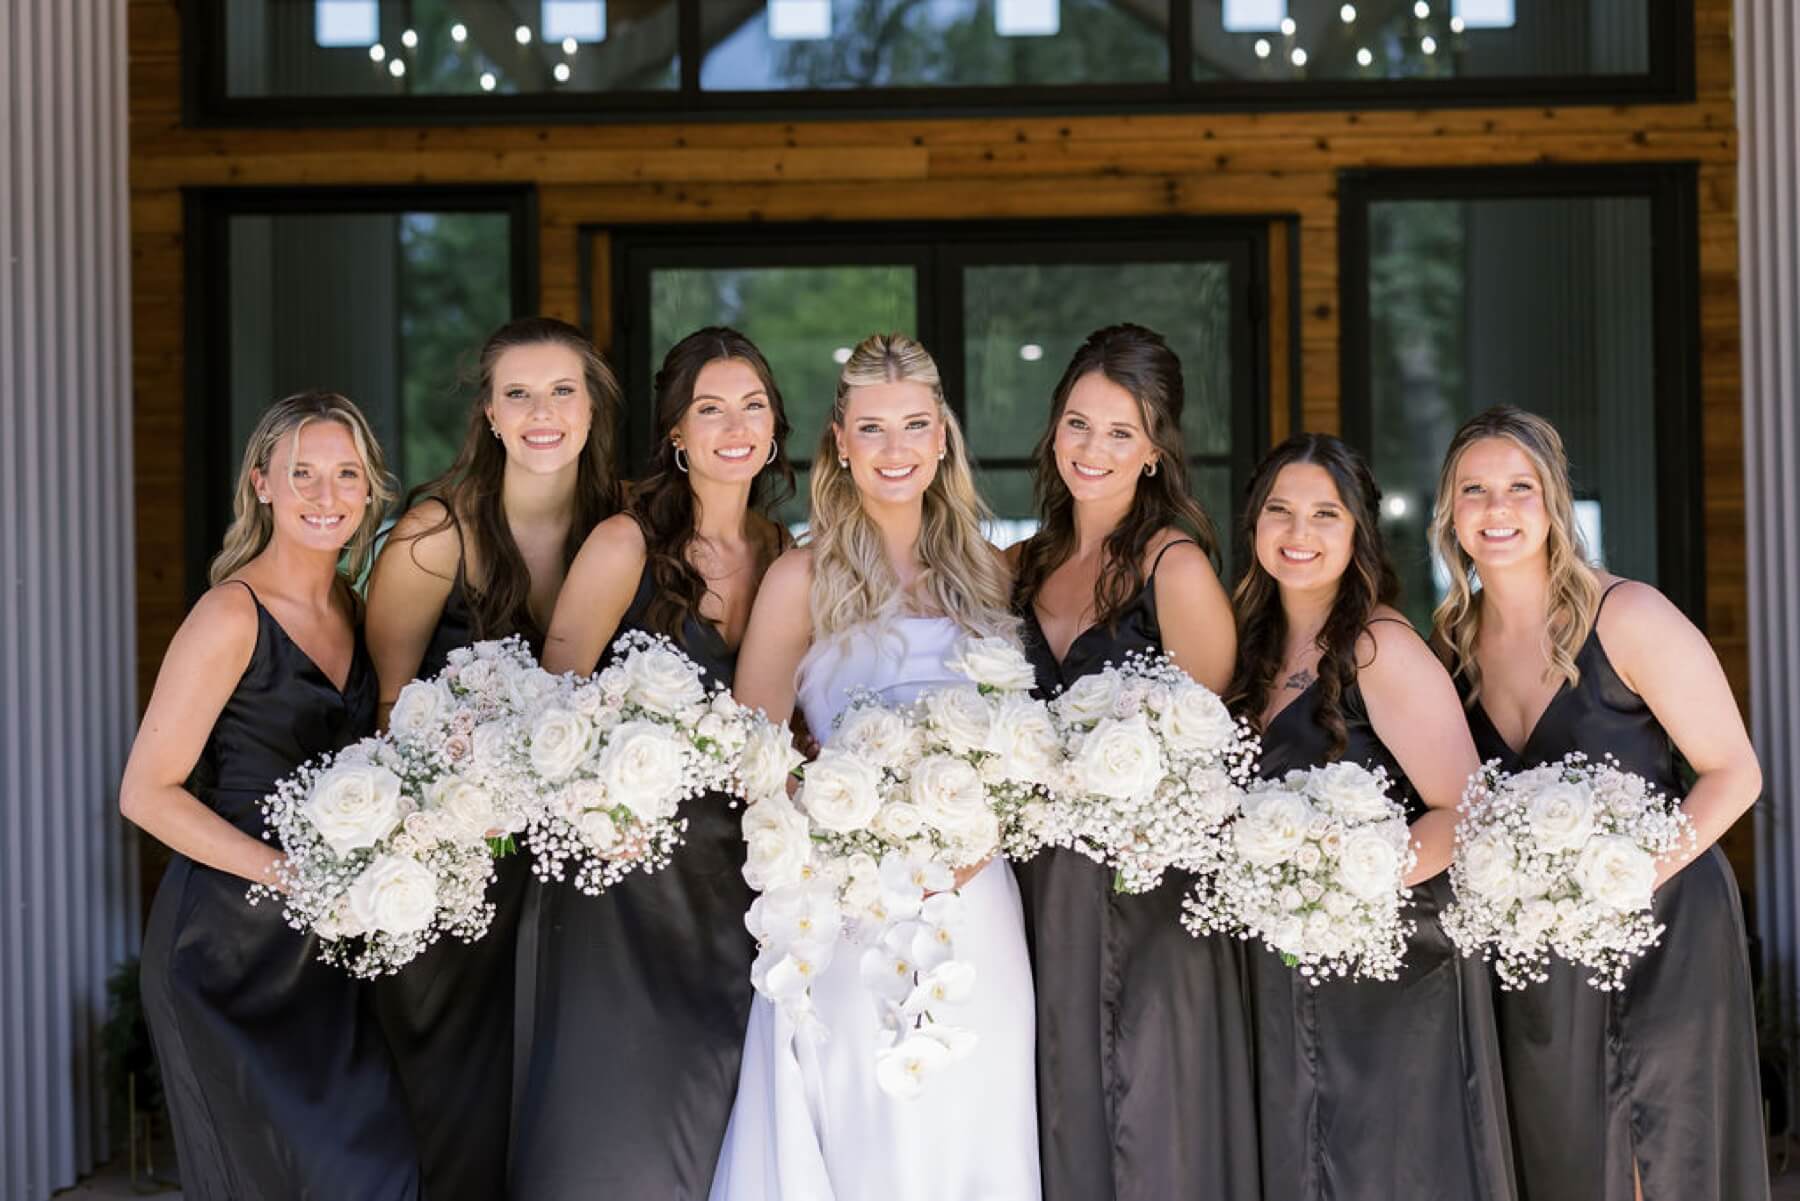 Bride holding bouquet with white orchids, roses, and baby's breath with bridesmaids in black dresses holding white bouquets at Union House TX